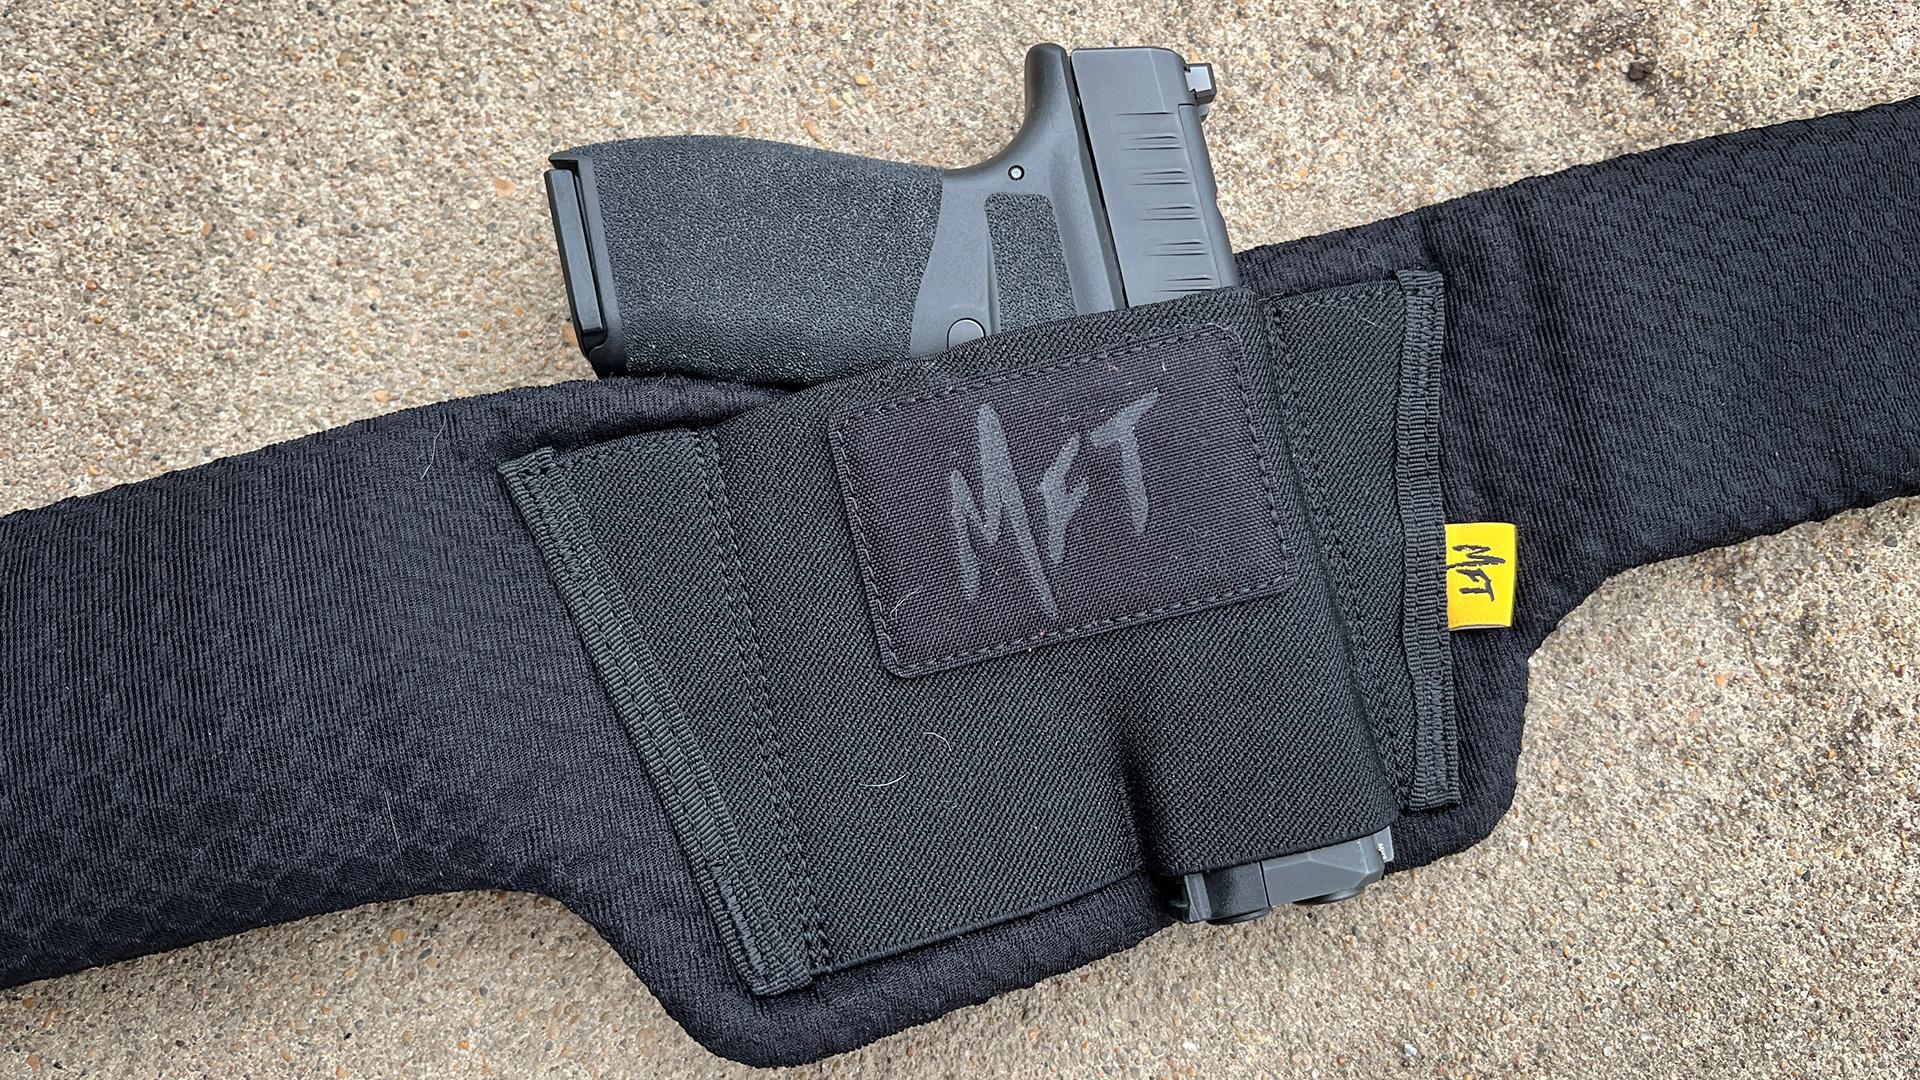 Review: Mission First Tactical Ultralite Belly Band Holster